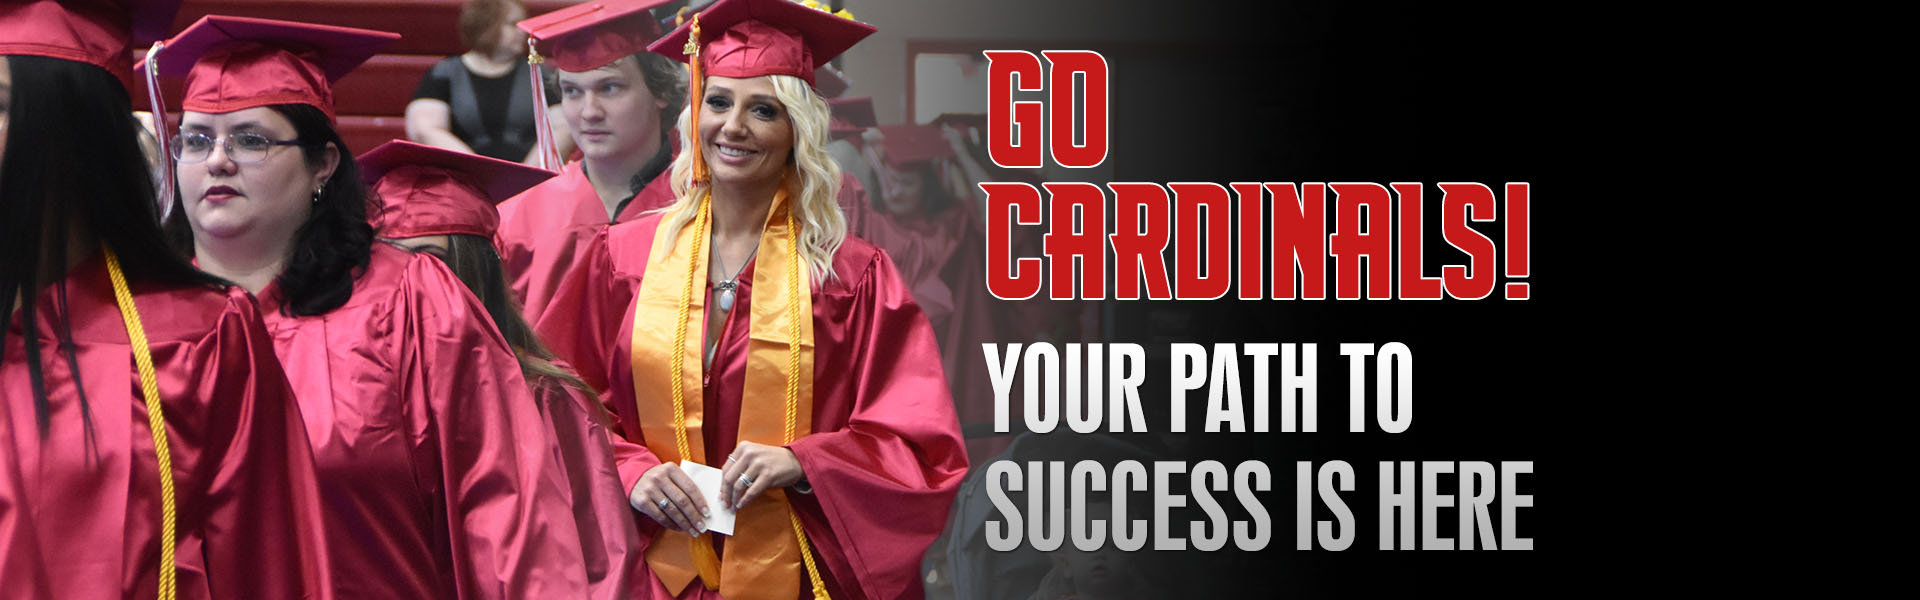 Go Cardinals! Your path to success is here